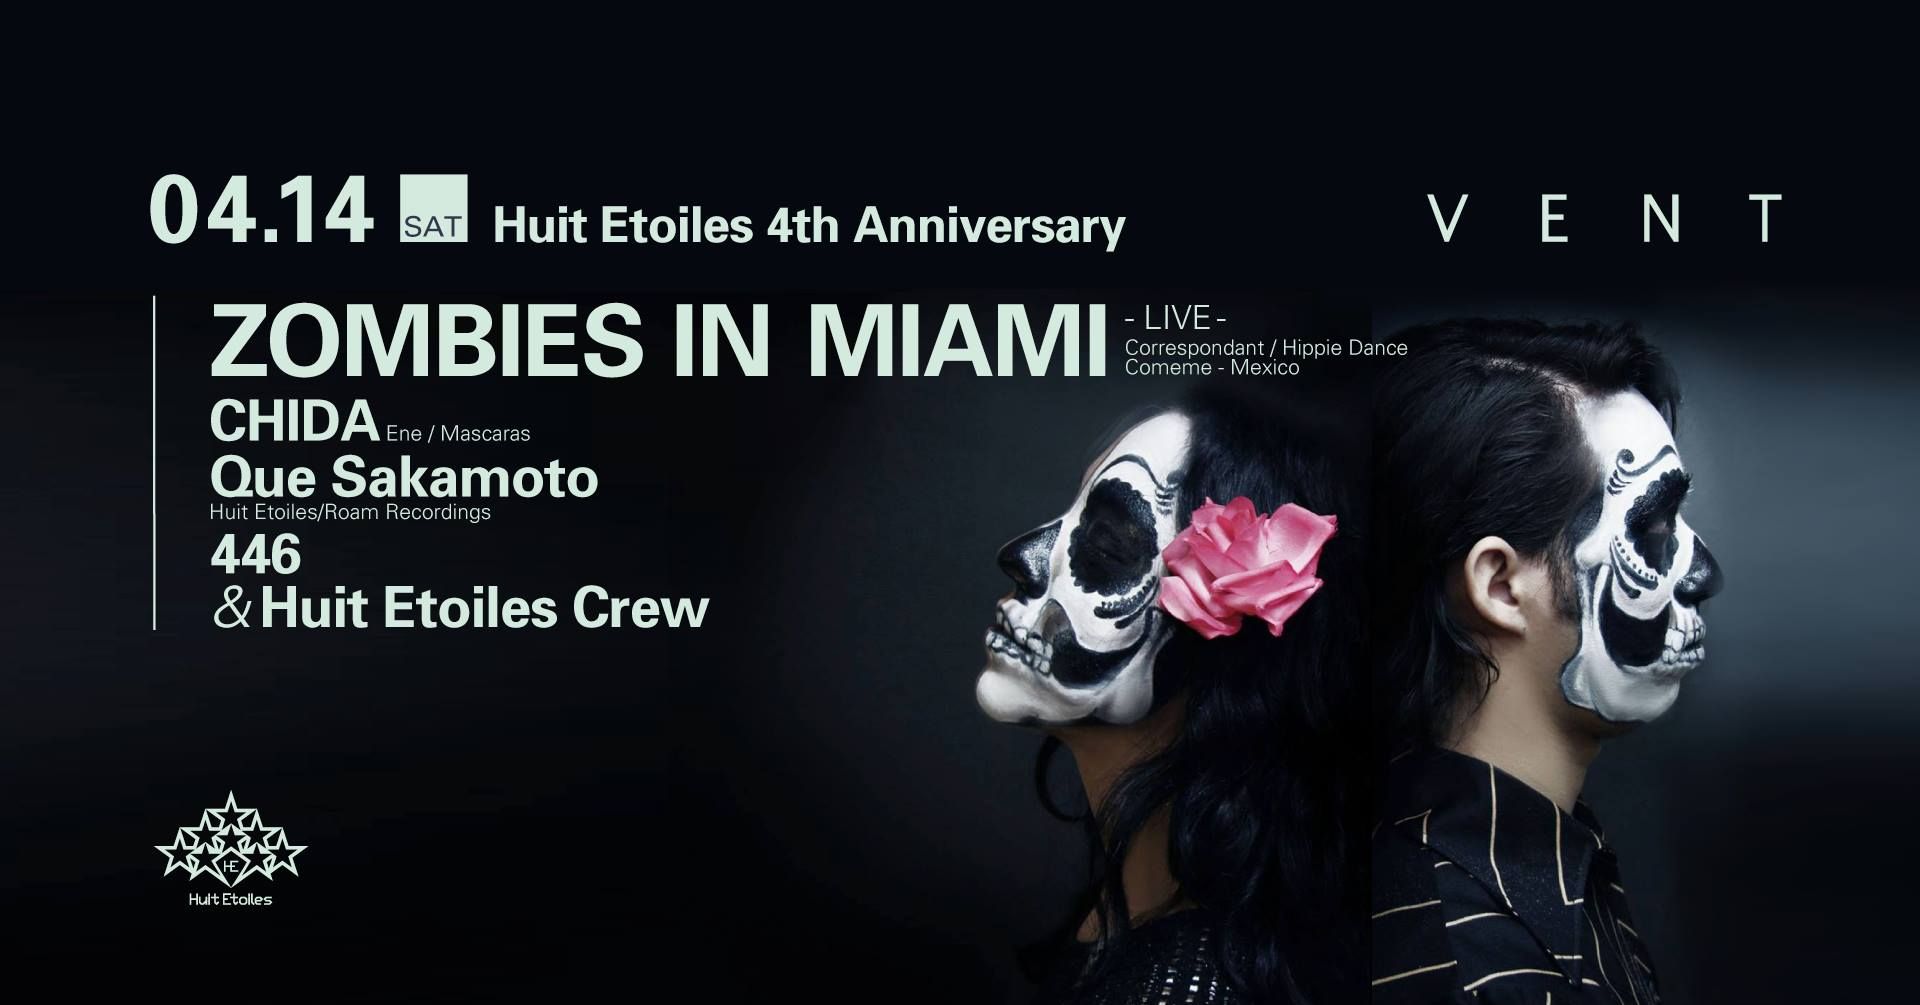 Zombies in Miami at Huit Etoiles 4th Anniversary